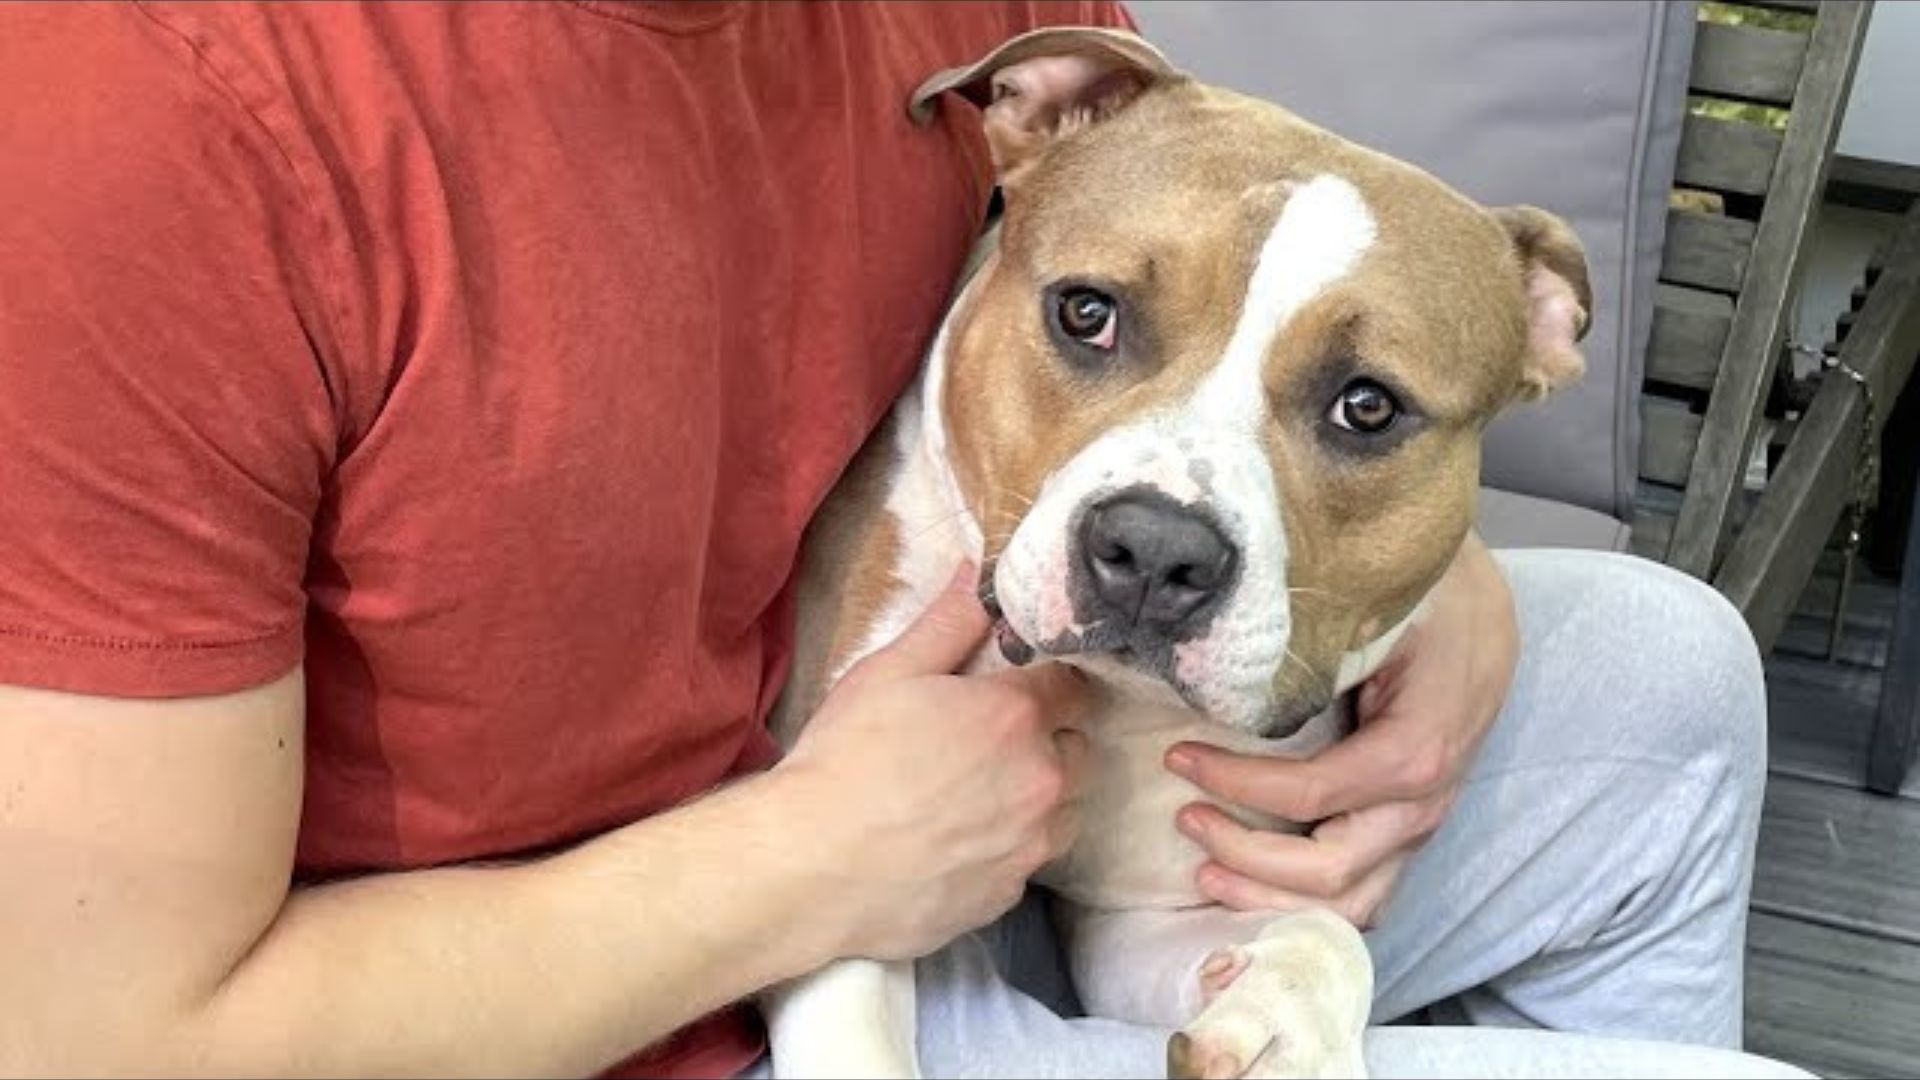 An Affectionate And Loyal Pup Surrendered To A Shelter Hopes To Find Humans Who Will Never Give Up On Him